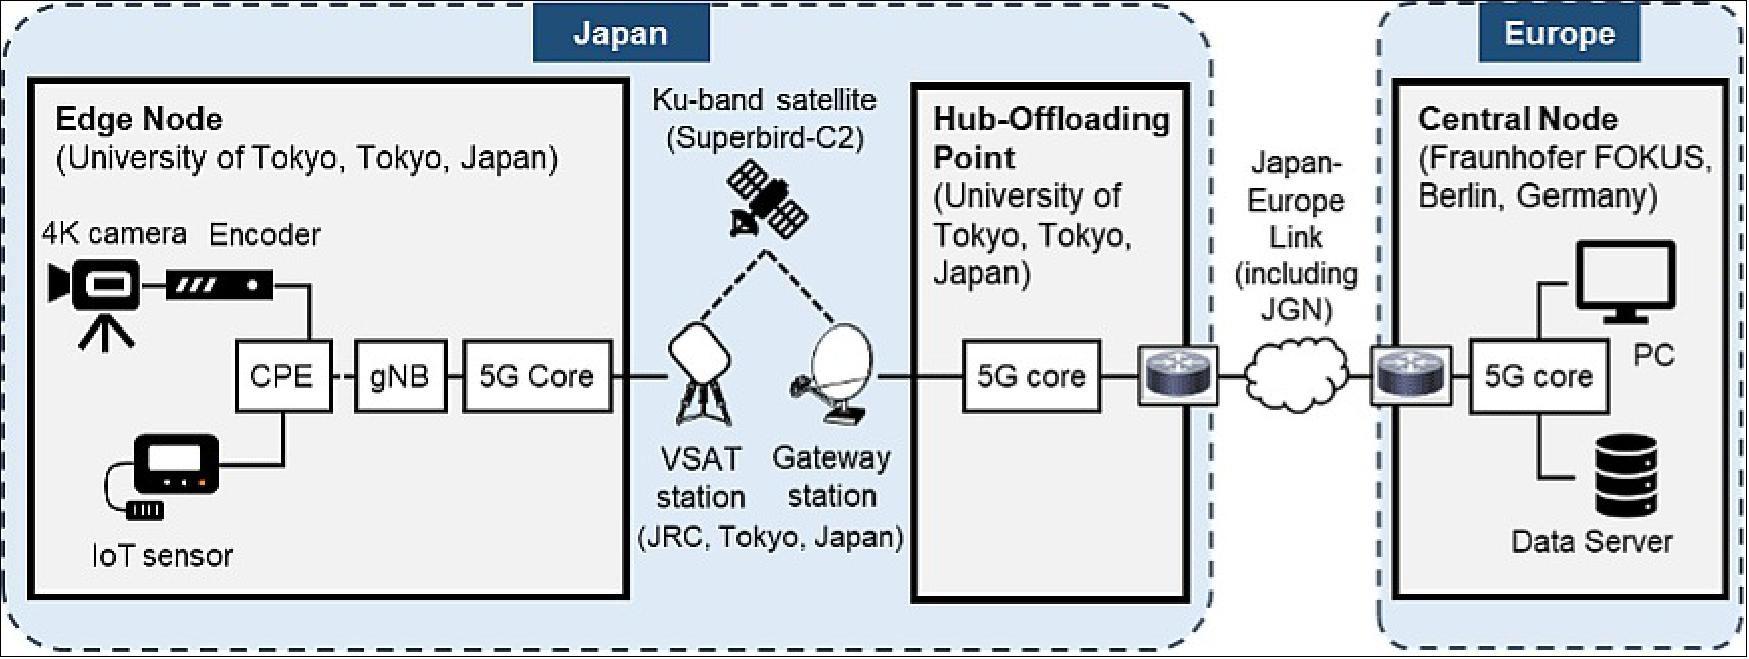 Figure 4: System configuration of the testbed in the Japan-Europe joint experiment (image credit: NICT)